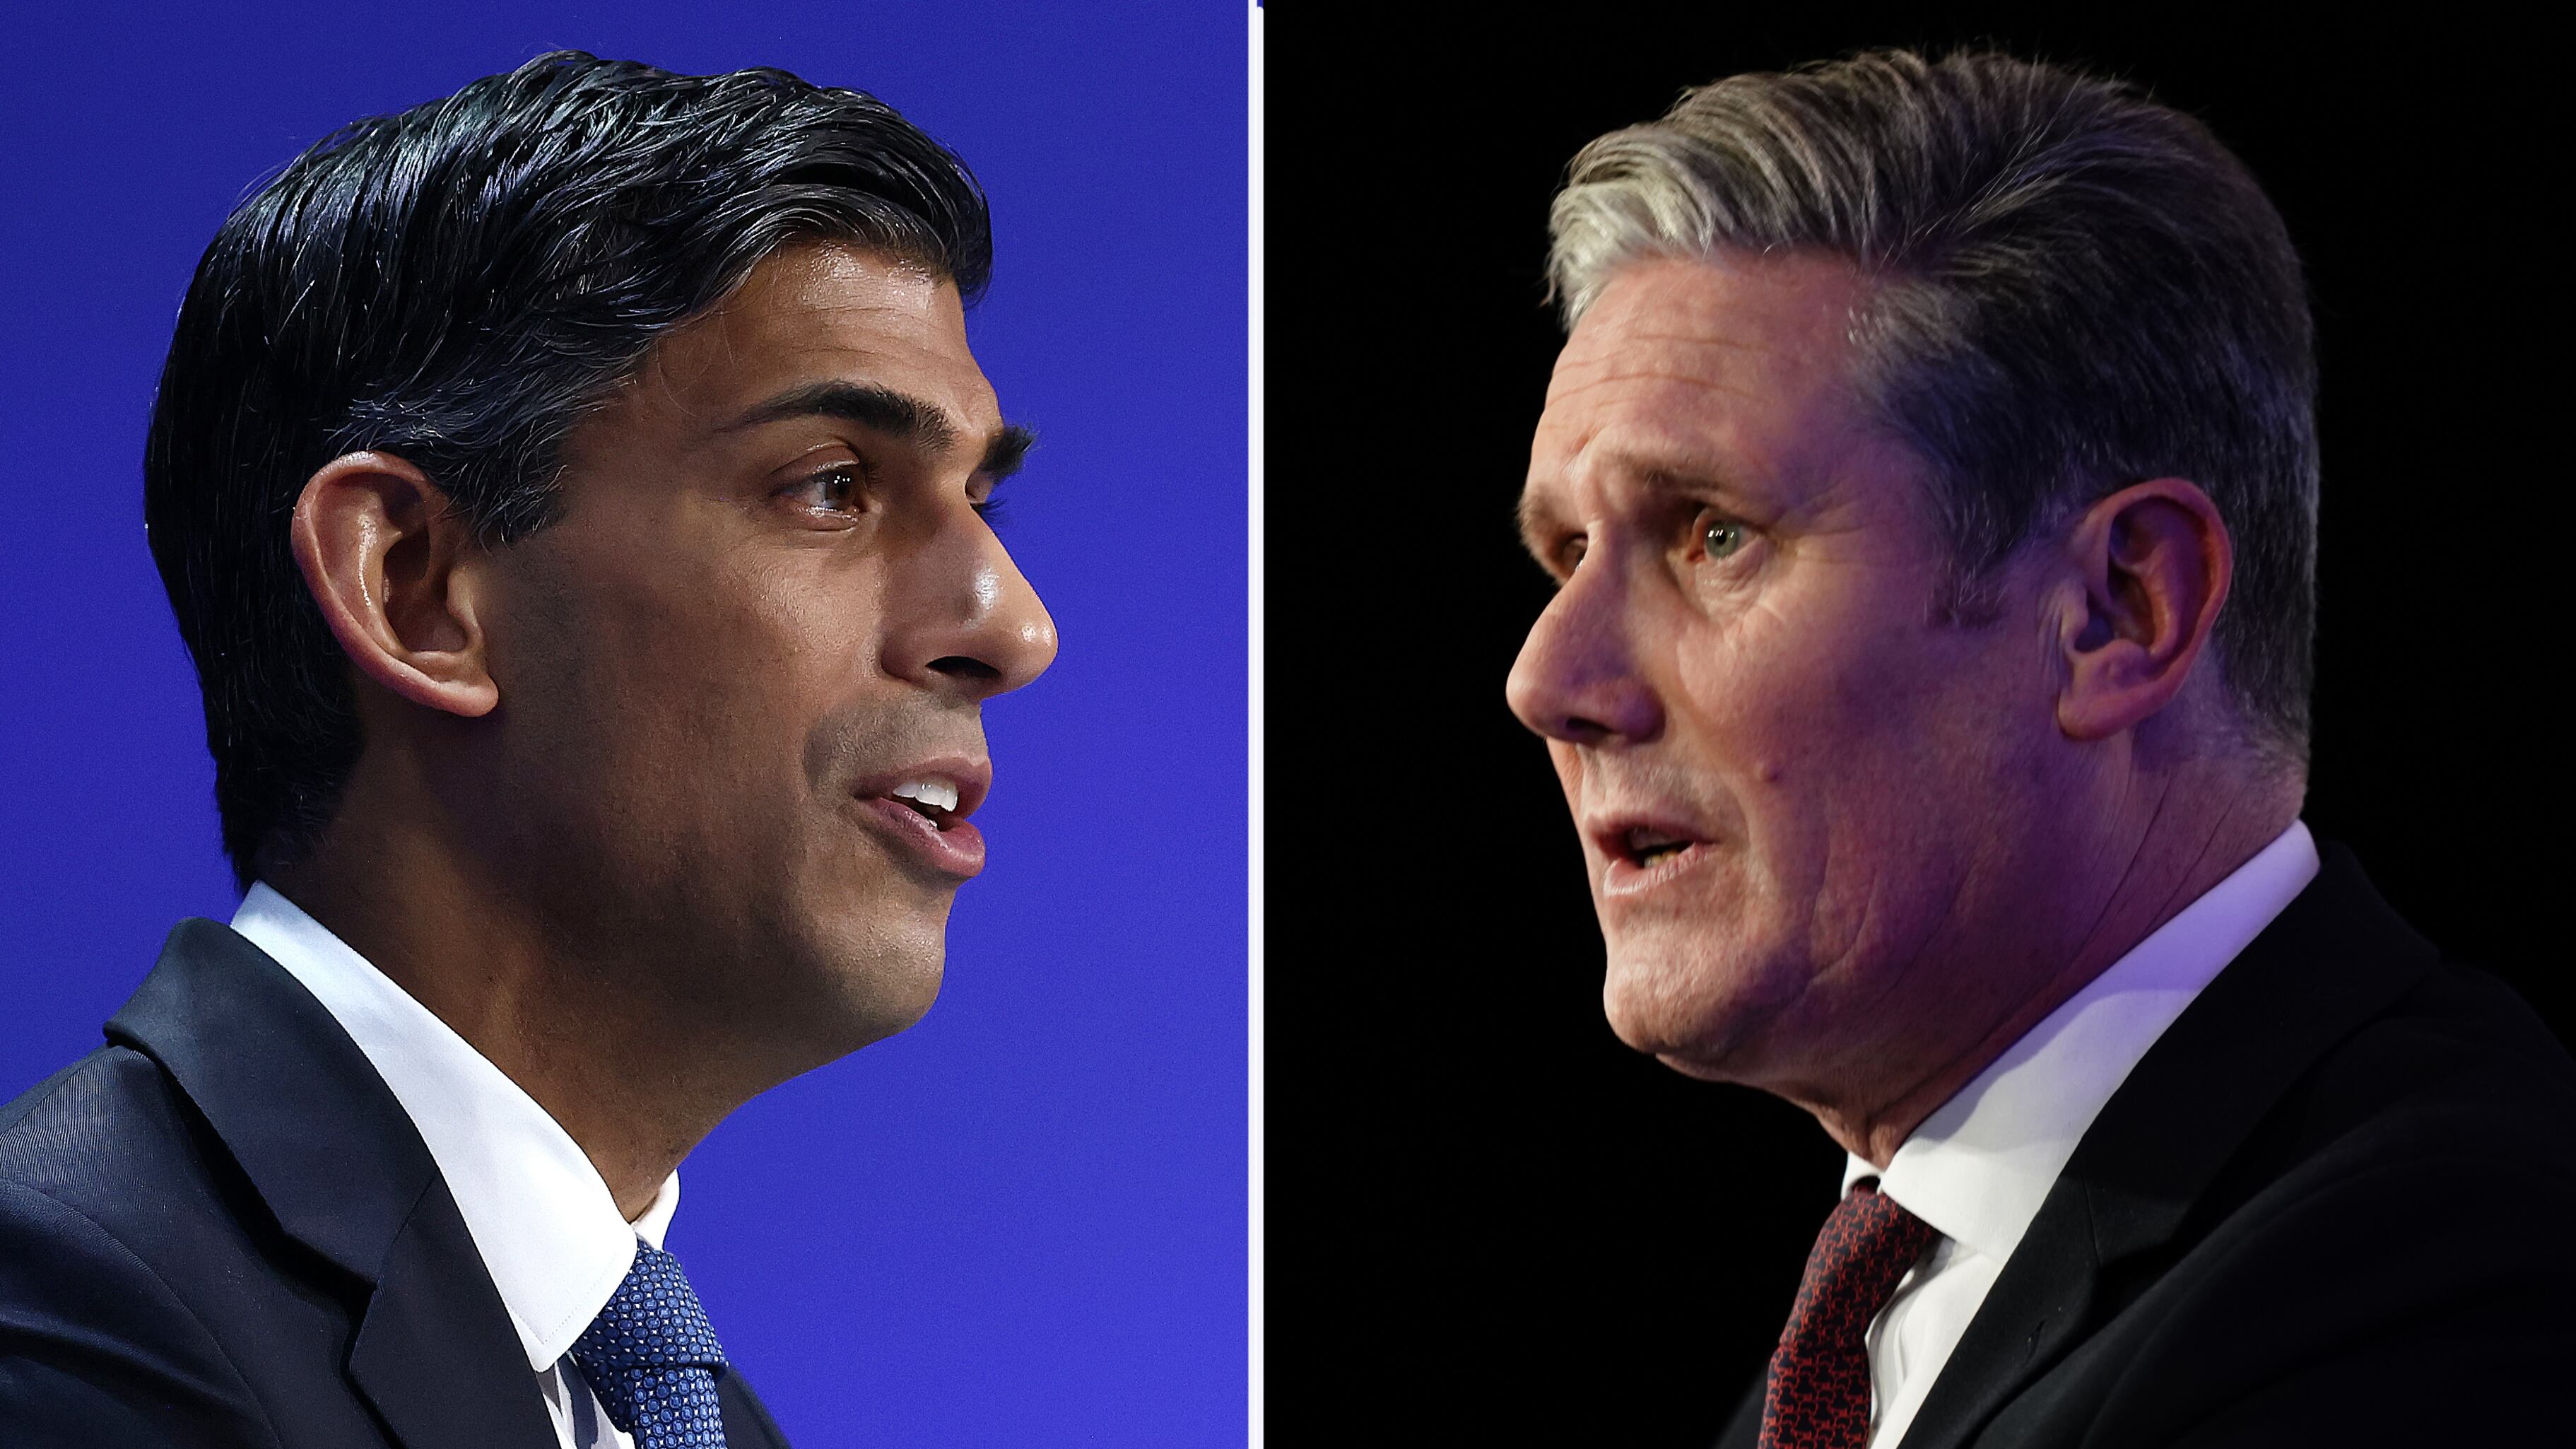 The IFS has studied the spending plans of the Conservatives under Rishi Sunak, and Sir Keir Starmer’s Labour